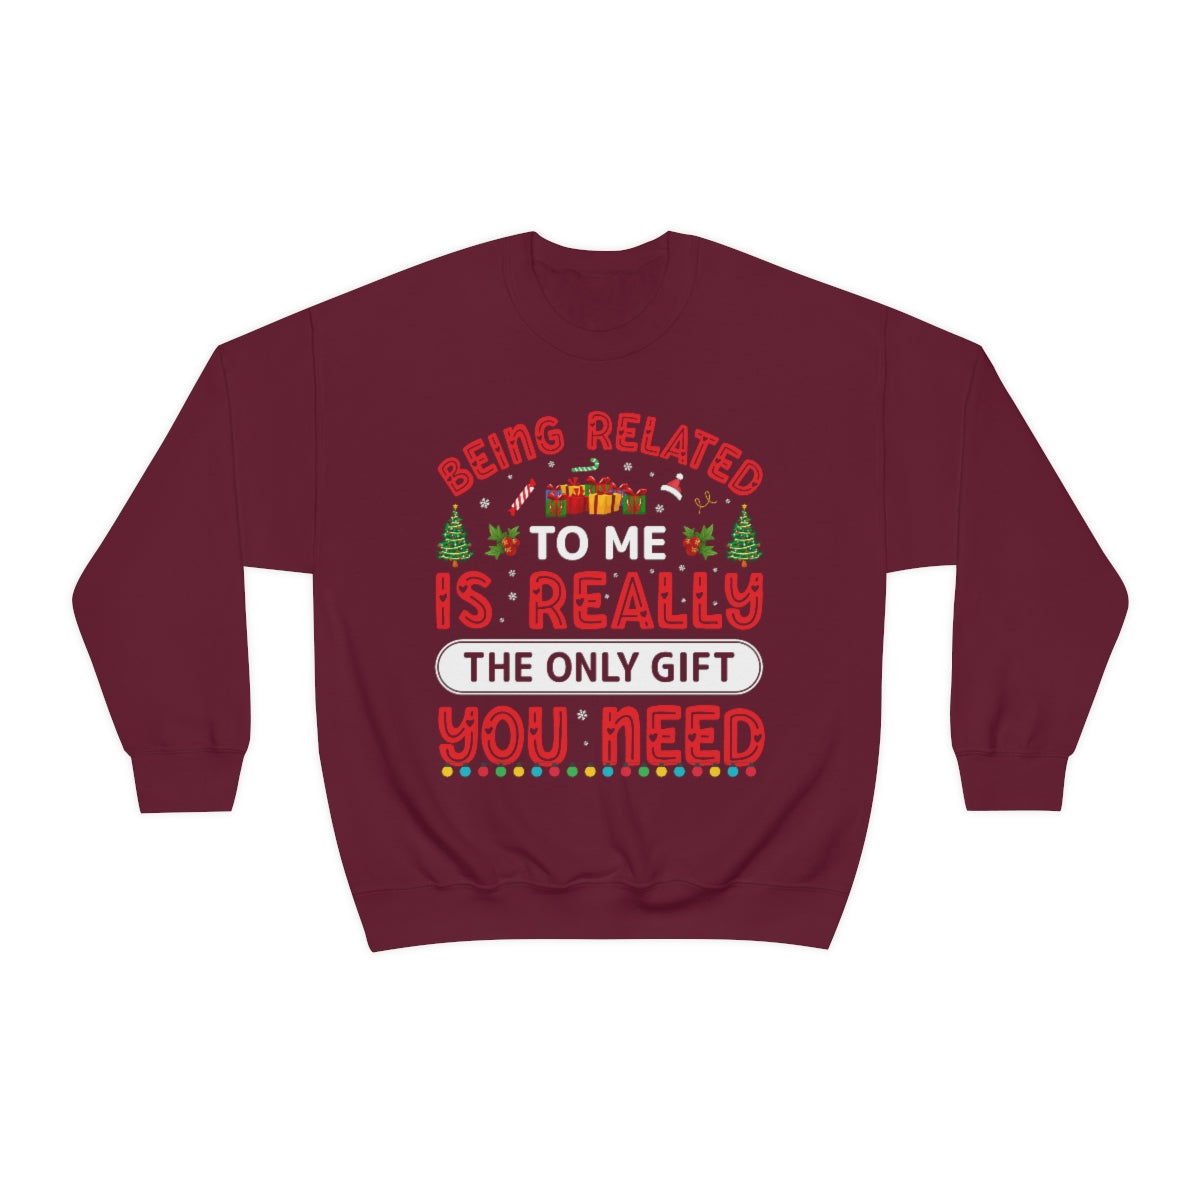 Funny Ugly Holiday Sweater, Related to Me Christmas Xmas Print Women Men Vintage Funny Party Winter Plus Size Sweatshirt Gift Starcove Fashion